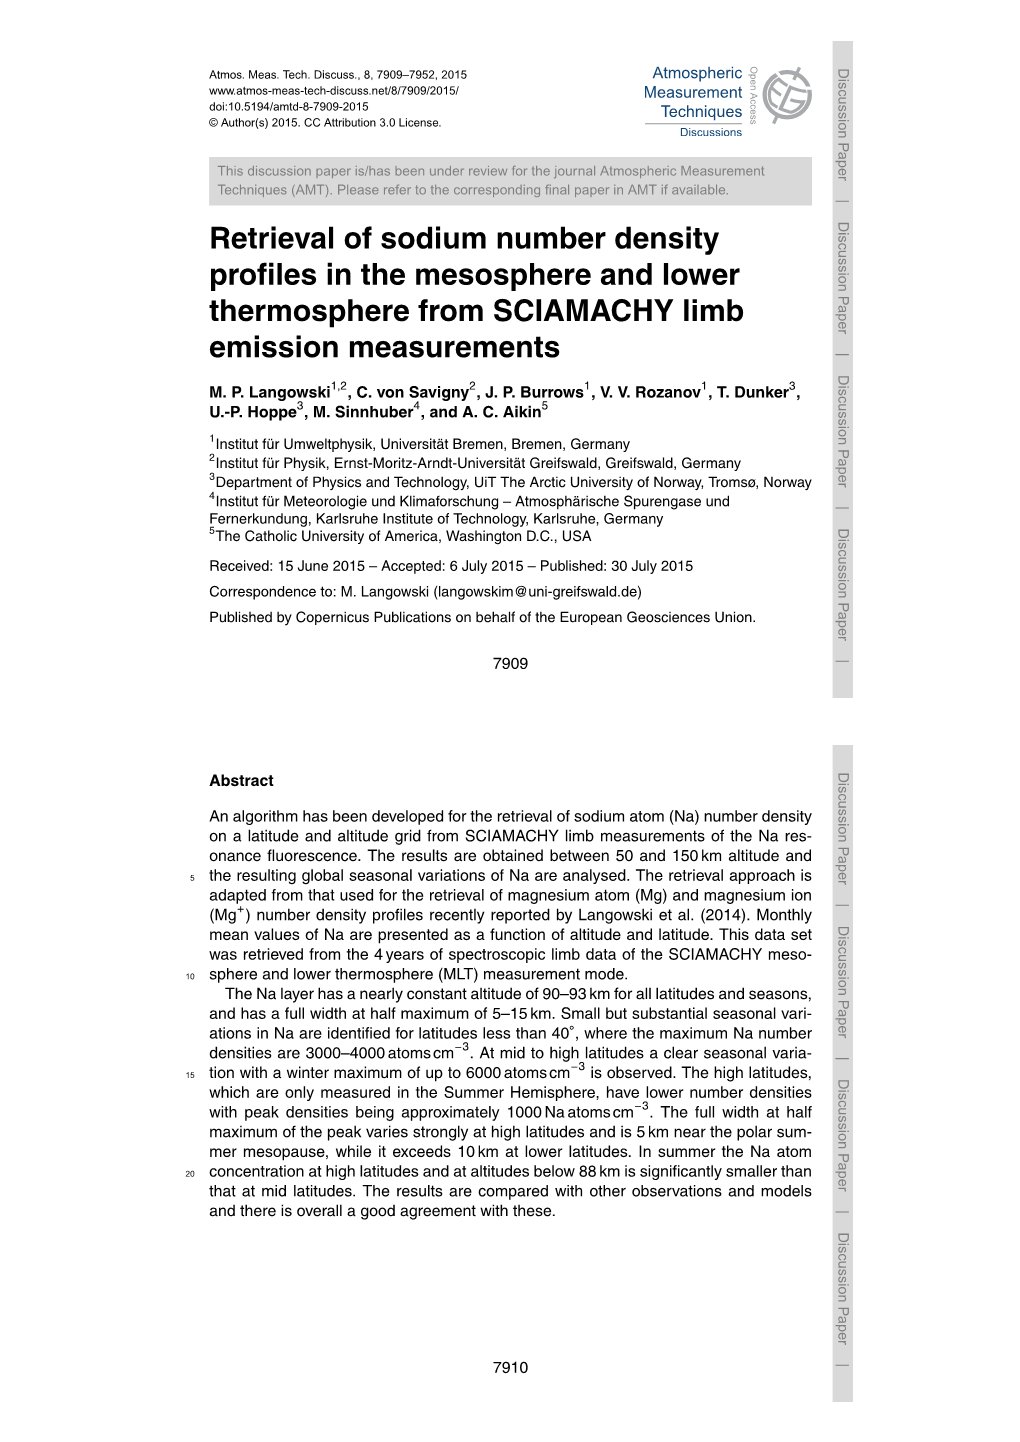 Retrieval of Sodium Number Density Profiles in the Mesosphere And